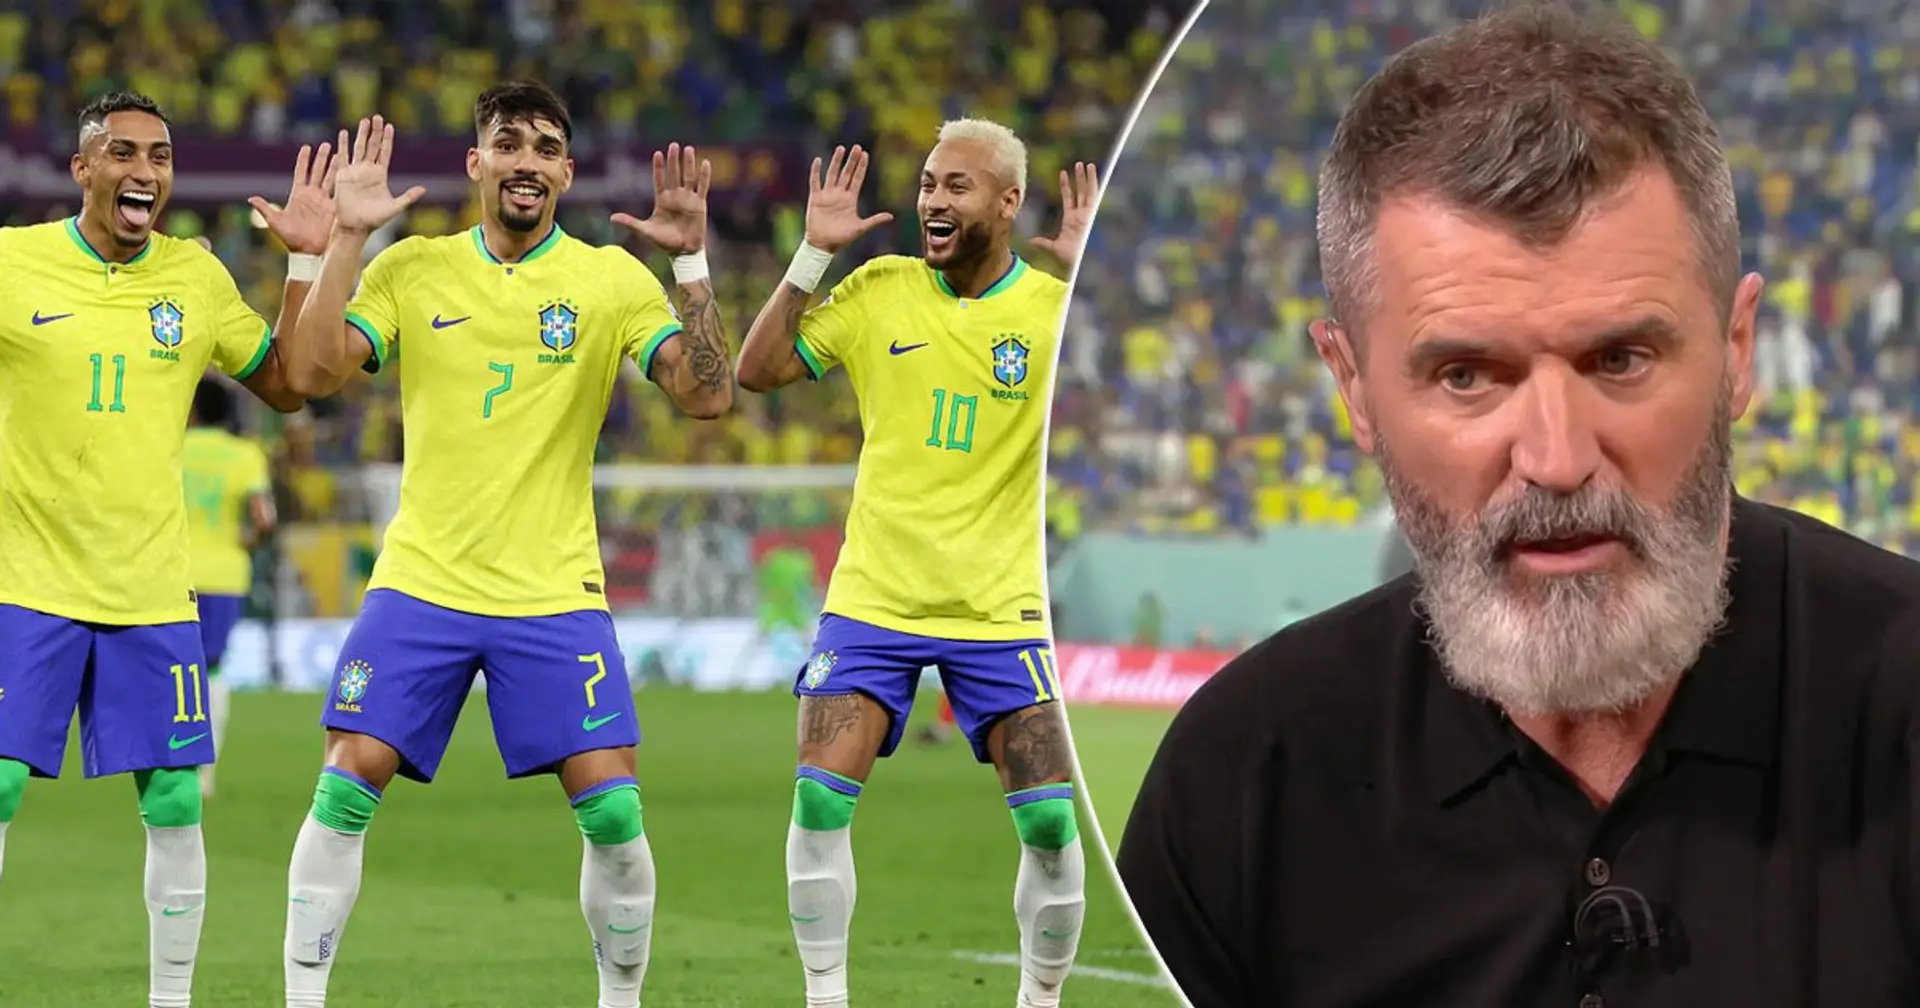 'The dance is a representation of our joy': Brazil midfielder Paqueta responds to Keane's 'disrepectful' rant